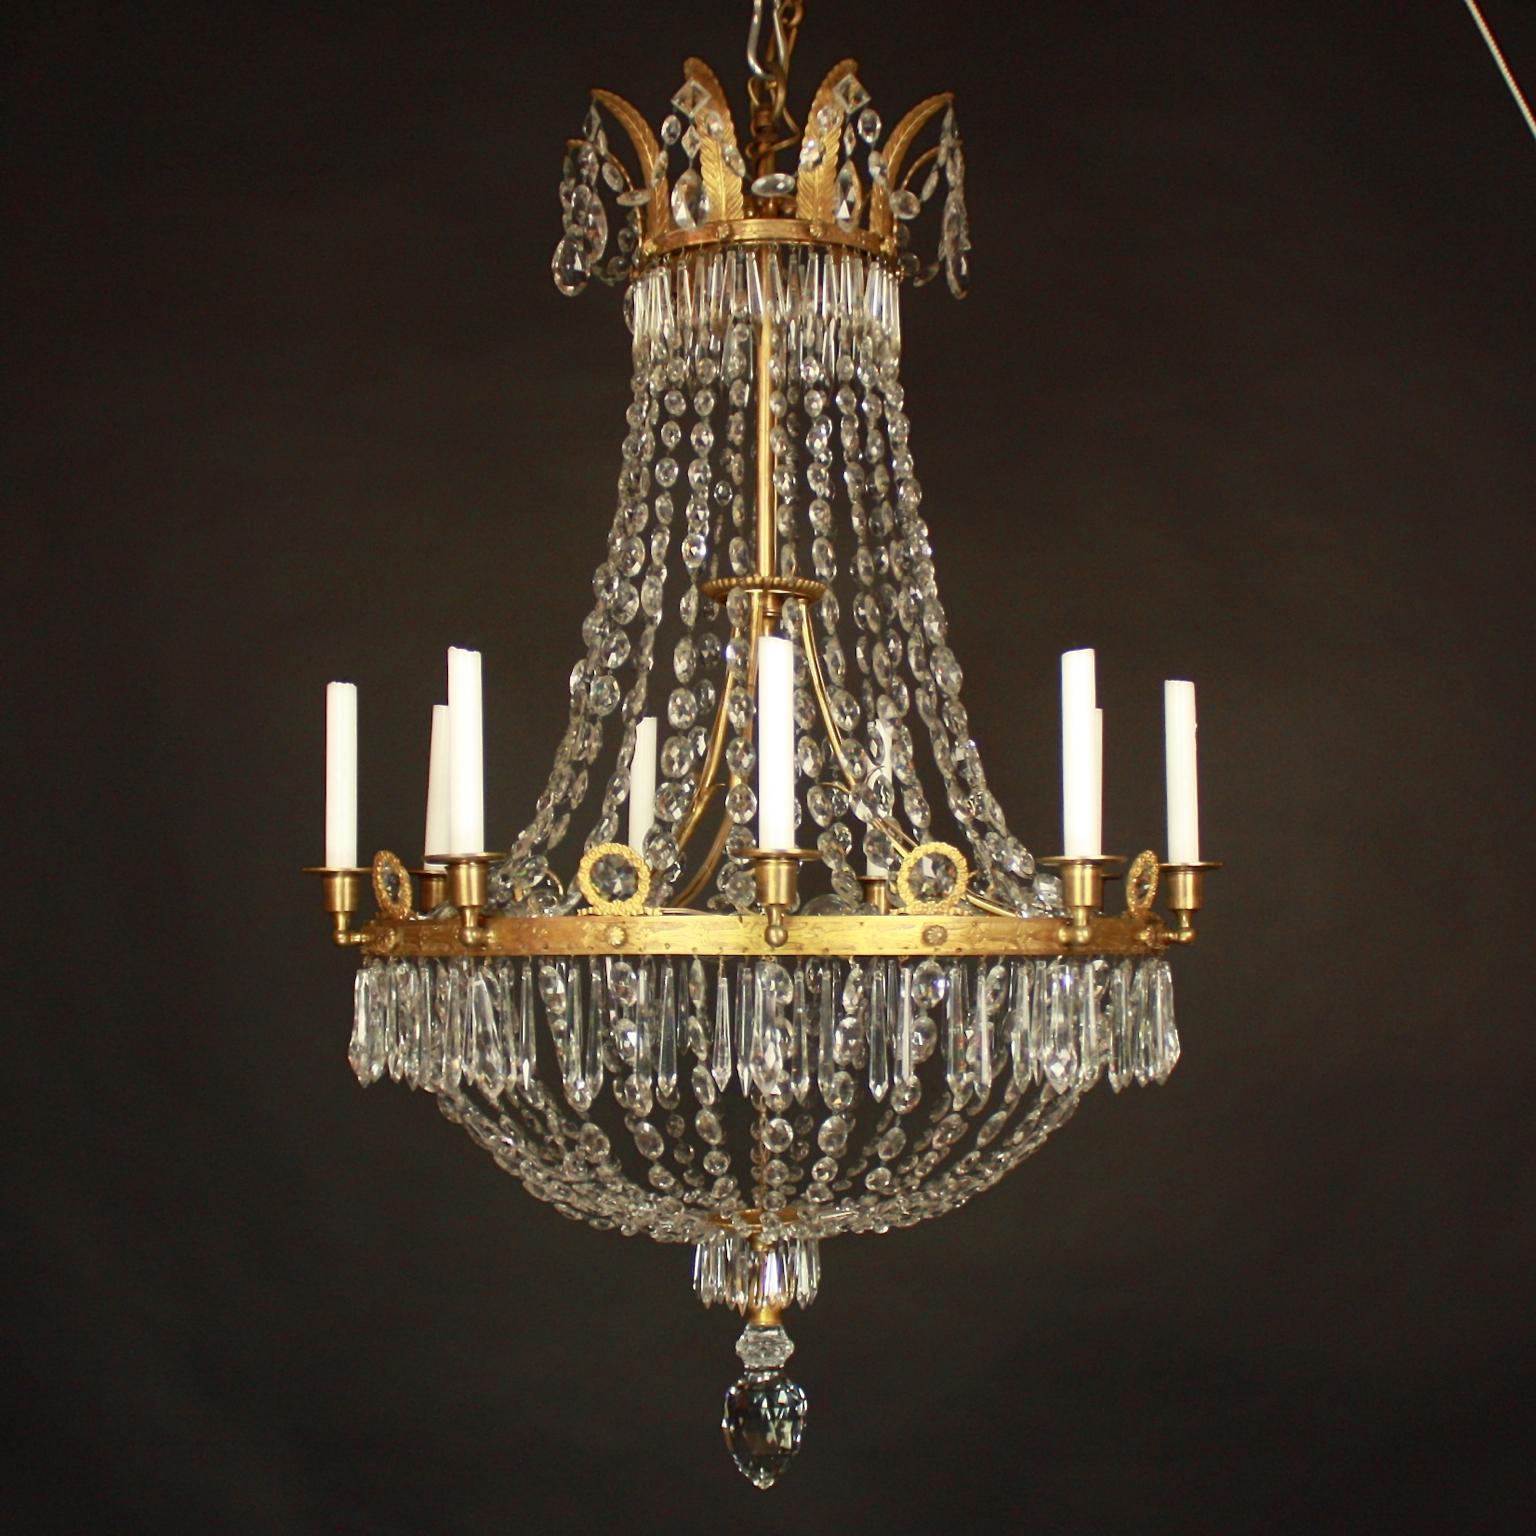 French Early 19th Century Empire Crystal-Cut and Gilt-Bronze Basket Chandelier For Sale 3